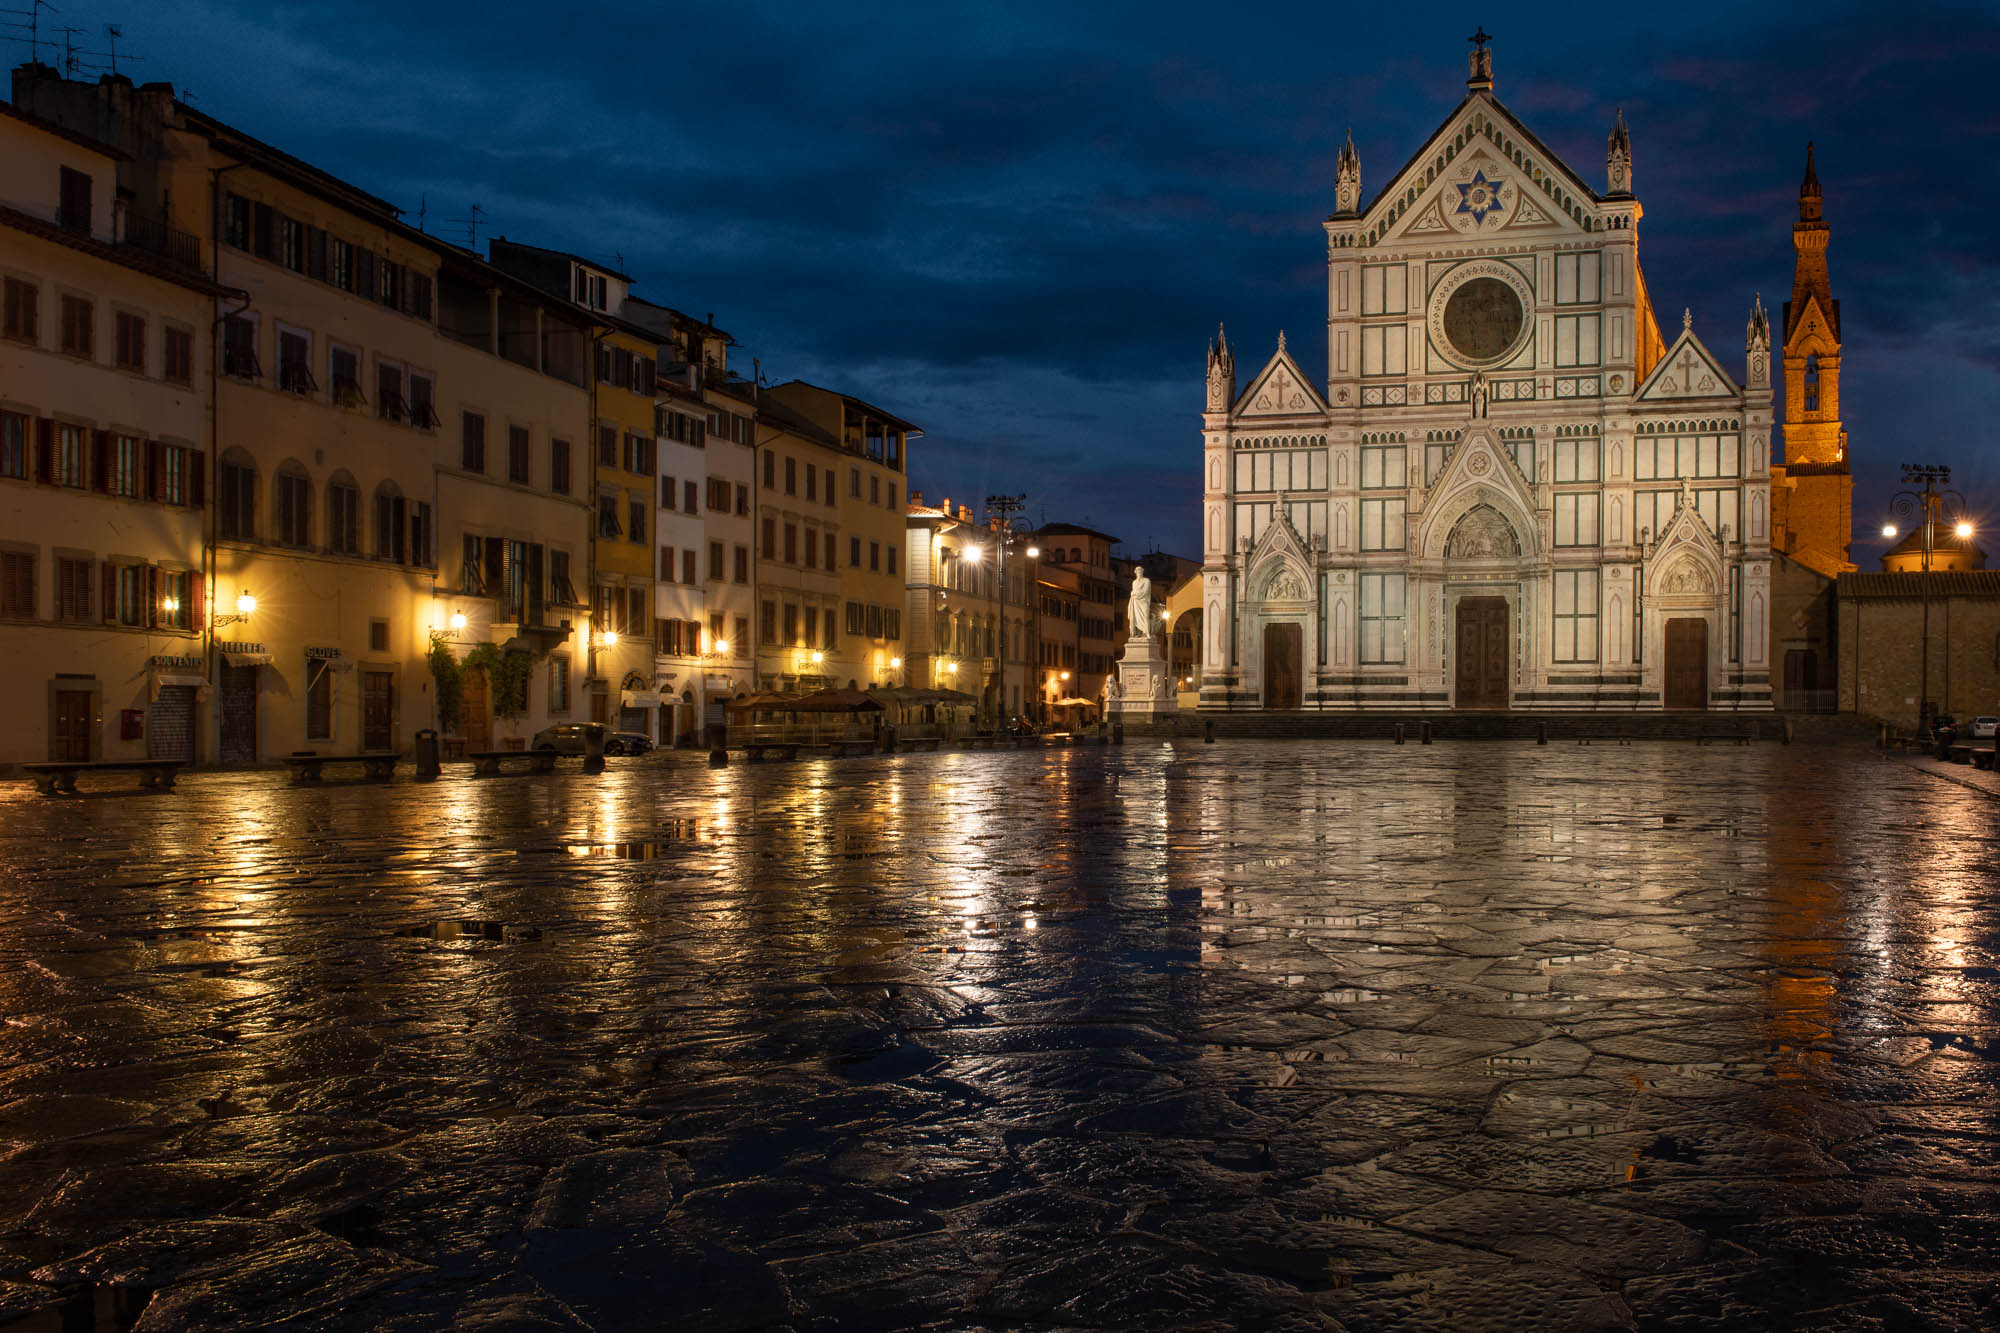 Colour Photography of the Basilica of Santa Croce in Florence